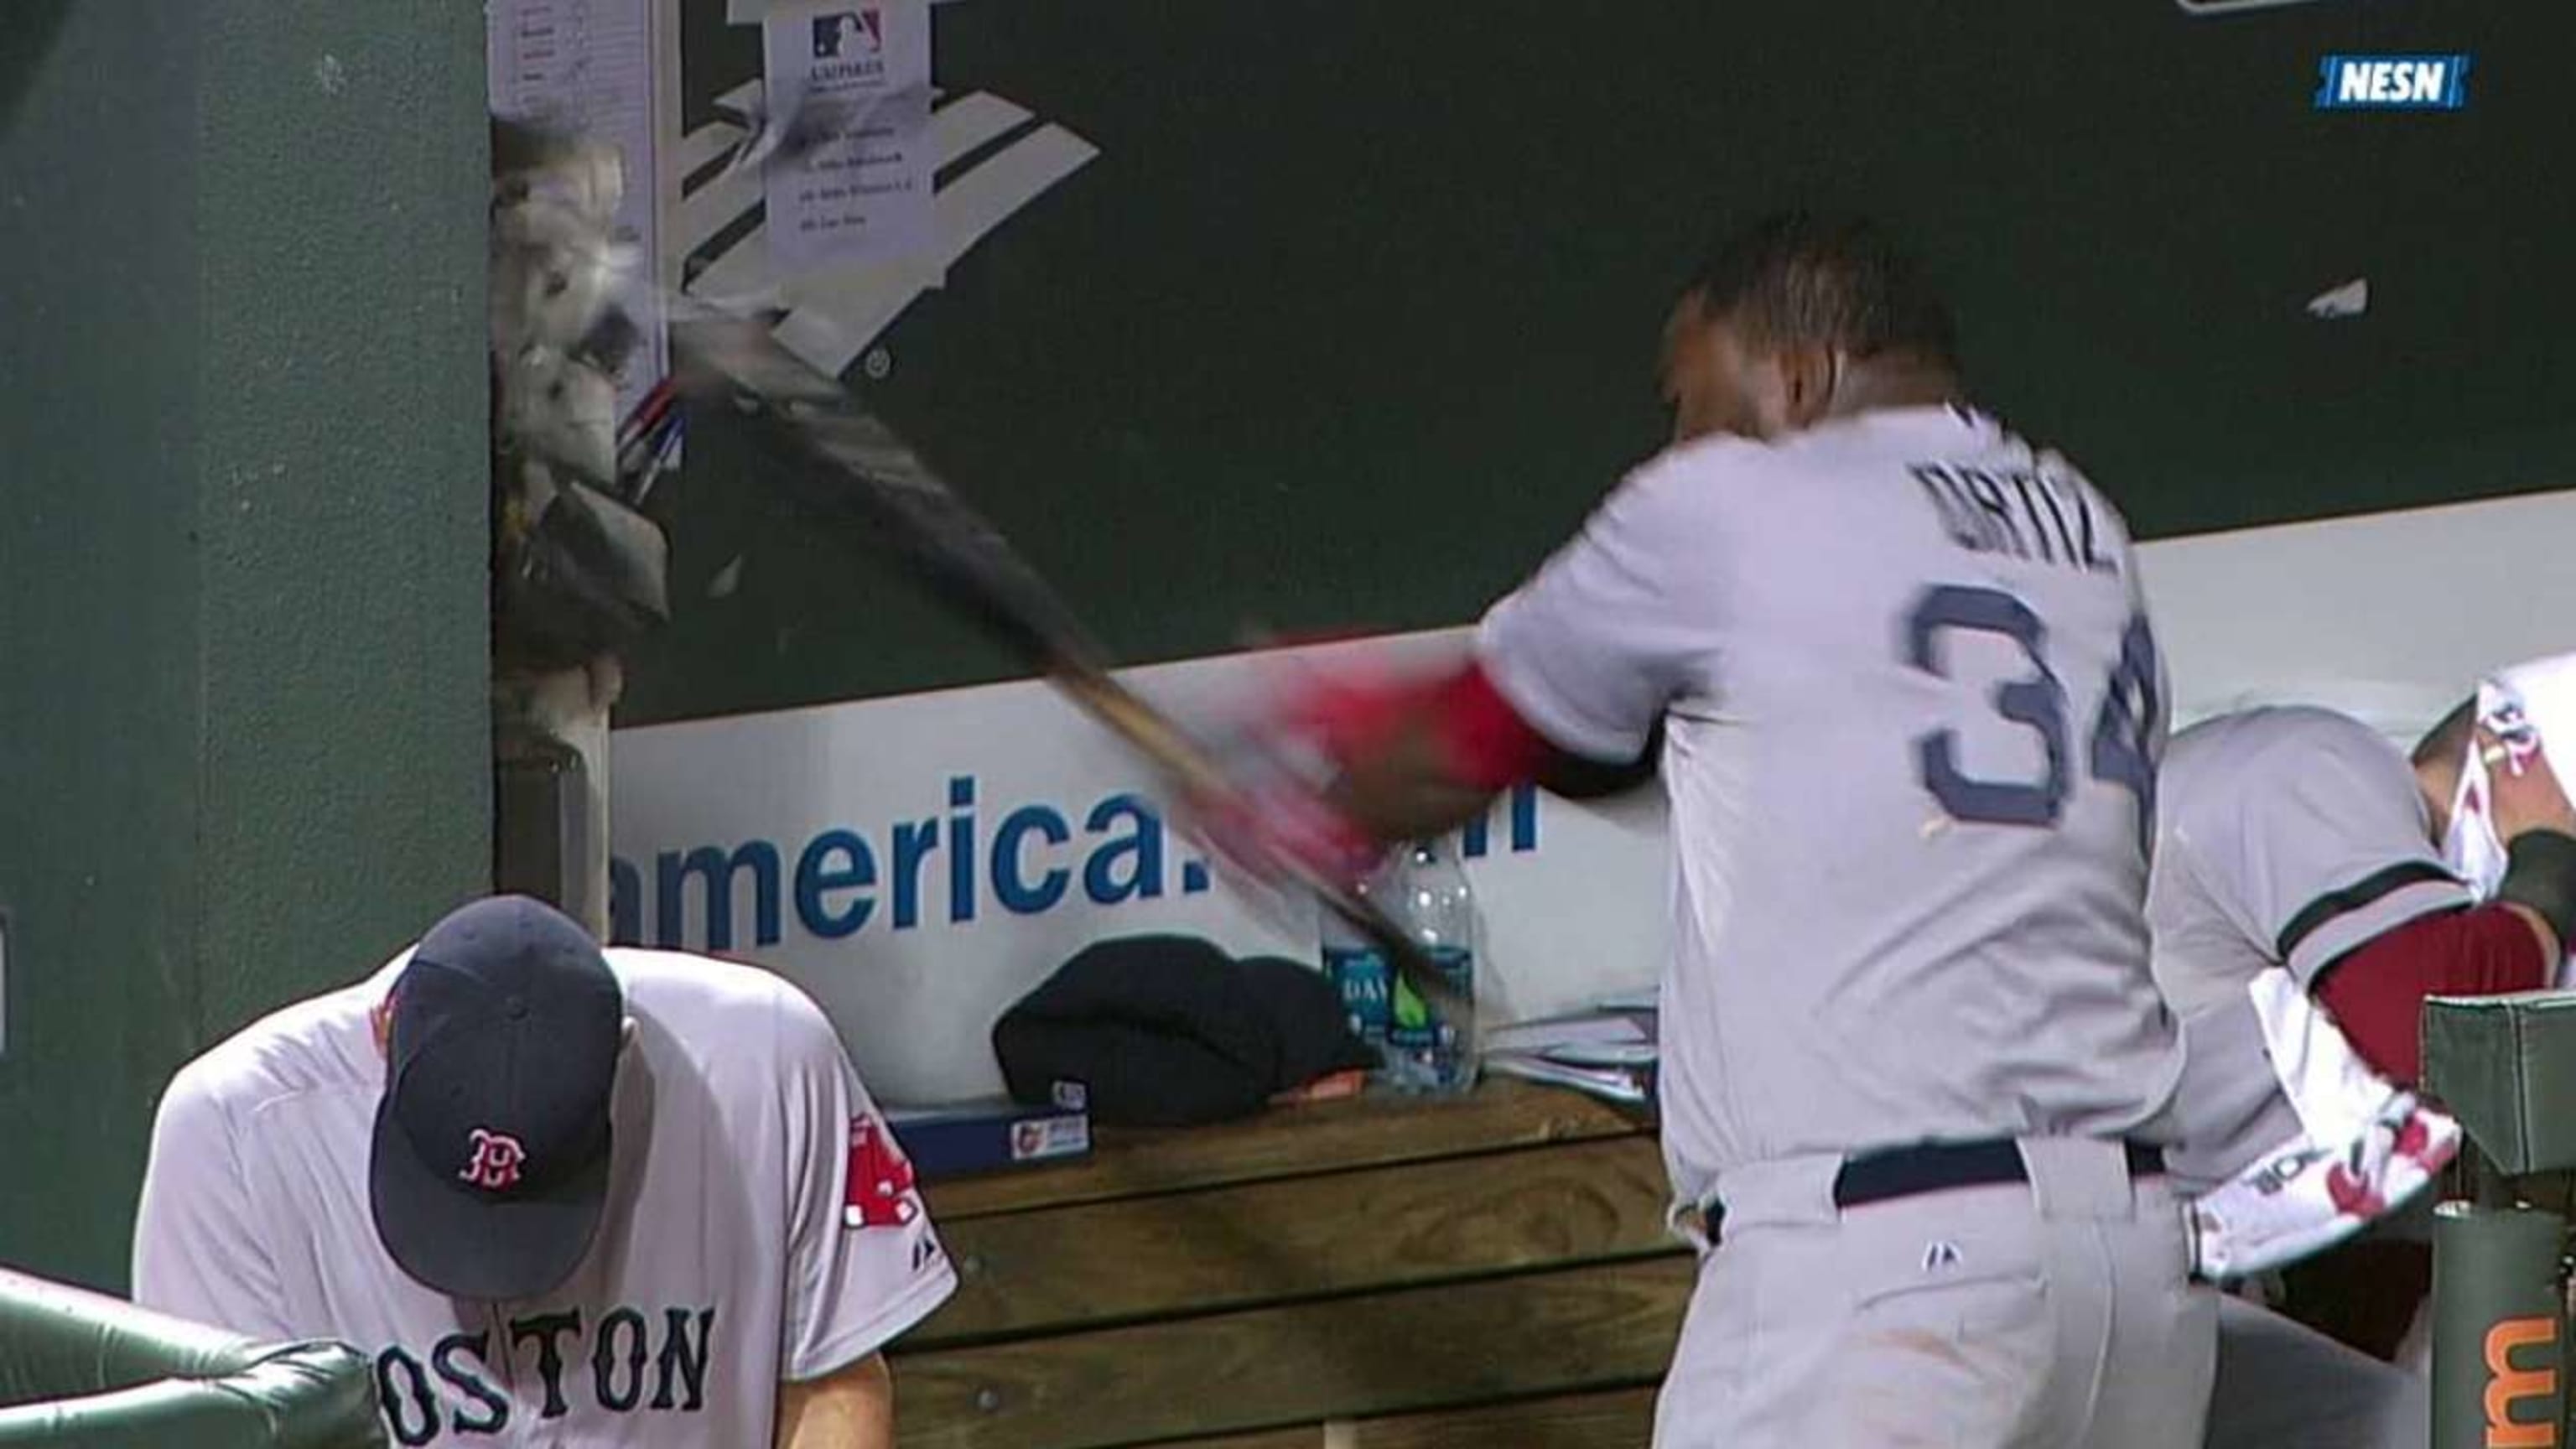 Ortiz smashes phone, gets tossed